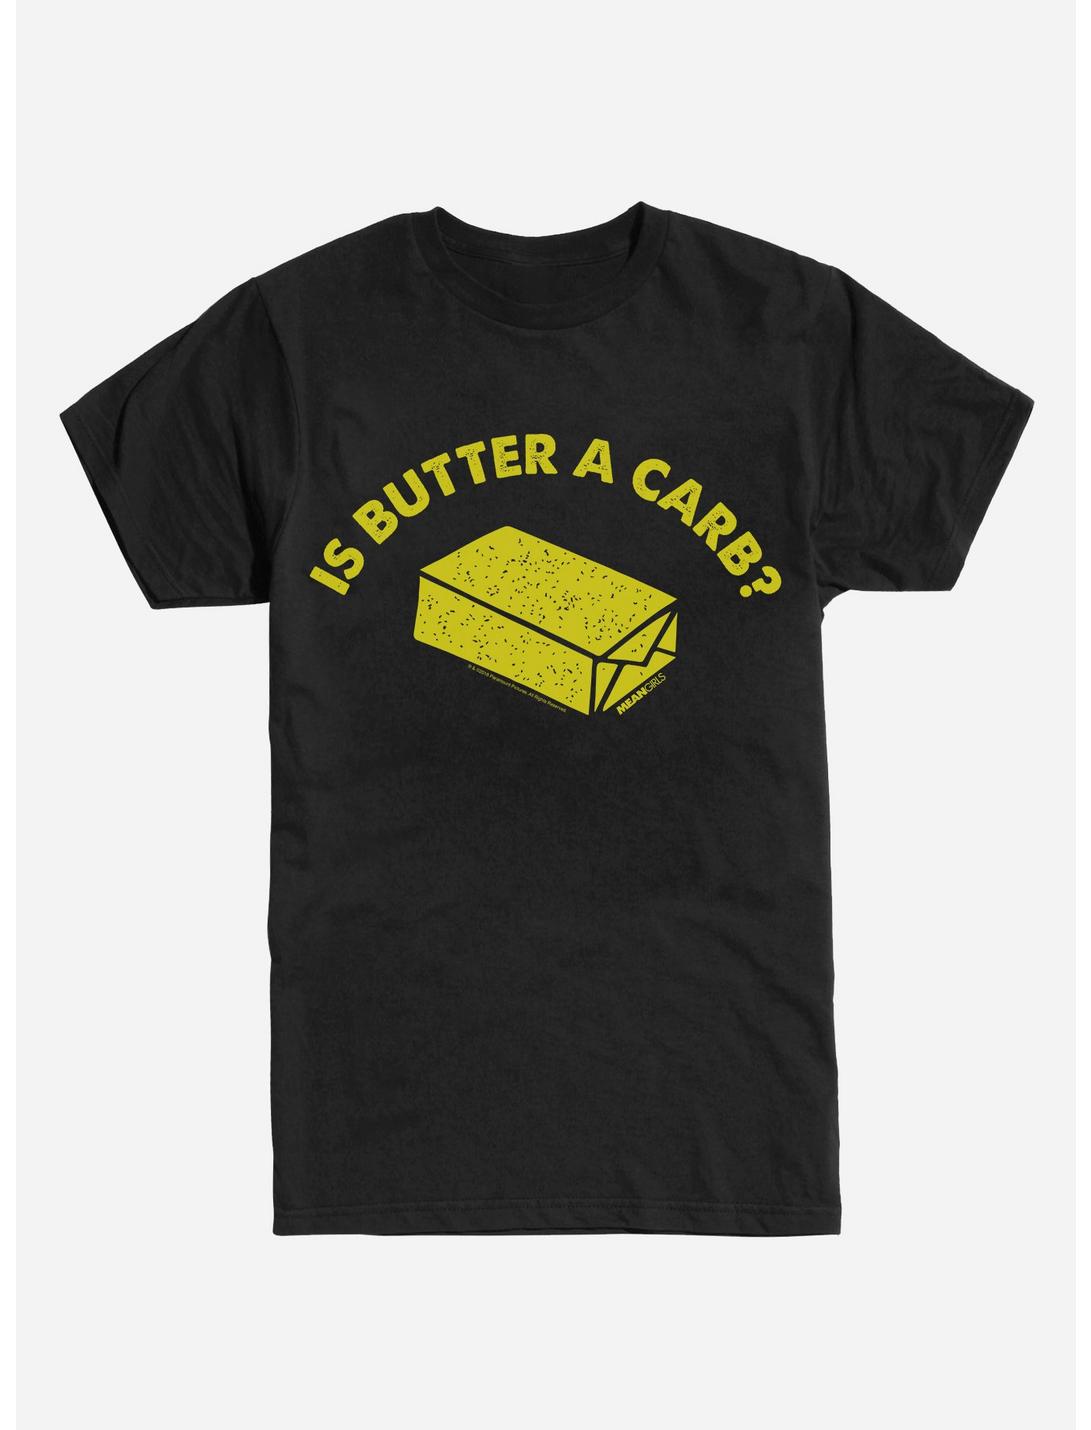 Mean Girls Is Butter a Carb T-Shirt, BLACK, hi-res